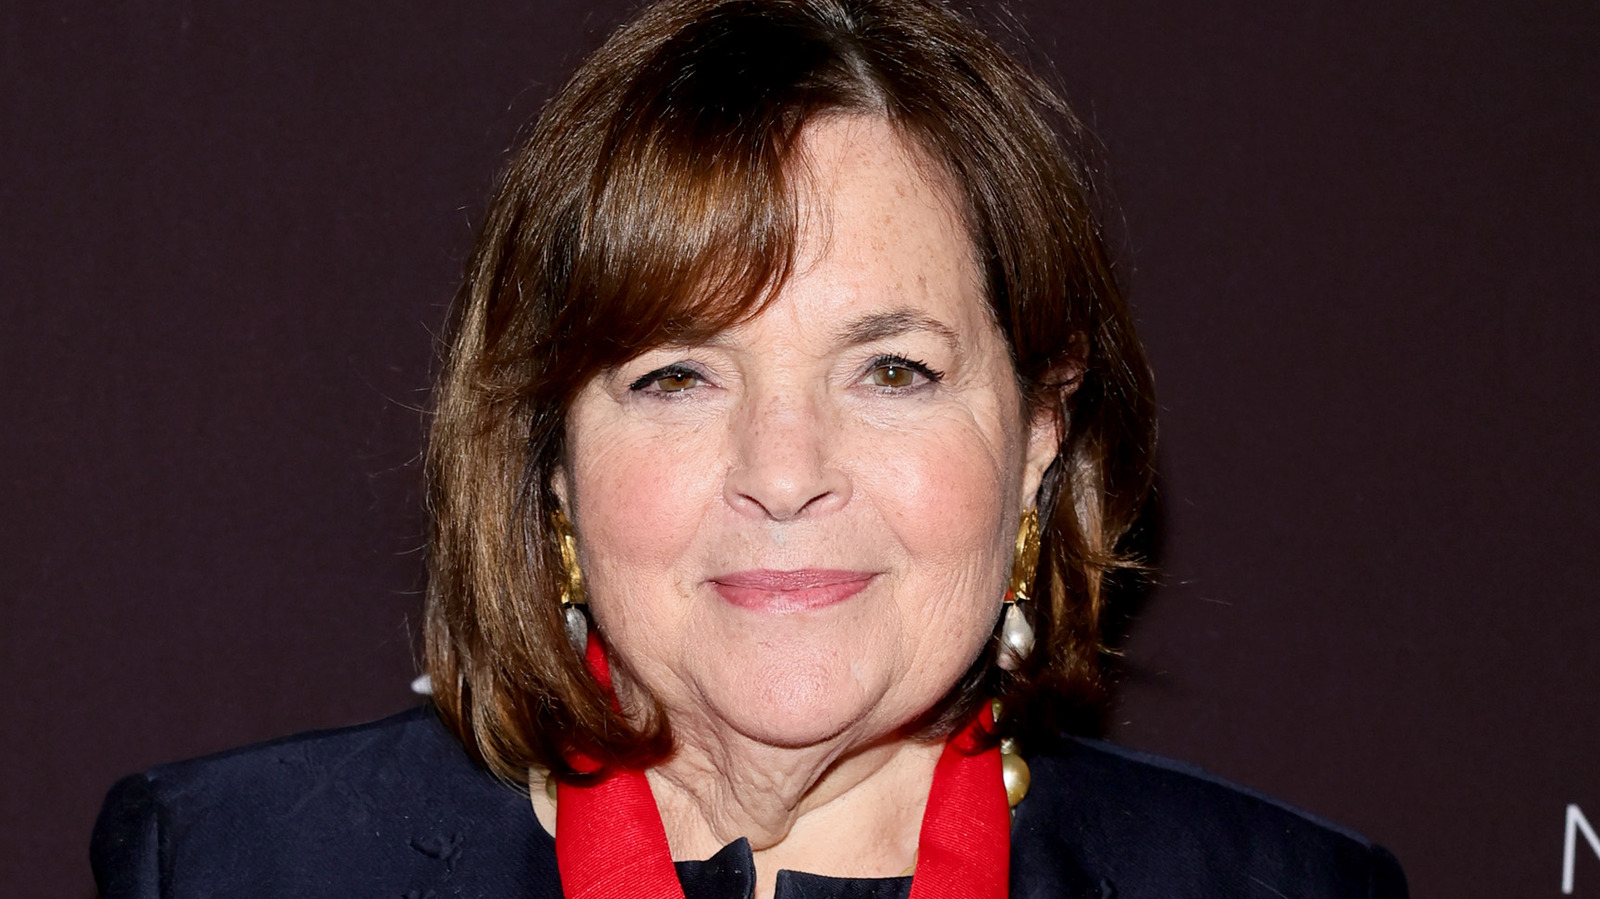 Ina Garten's Hack For Drying Lettuce Without A Salad Spinner